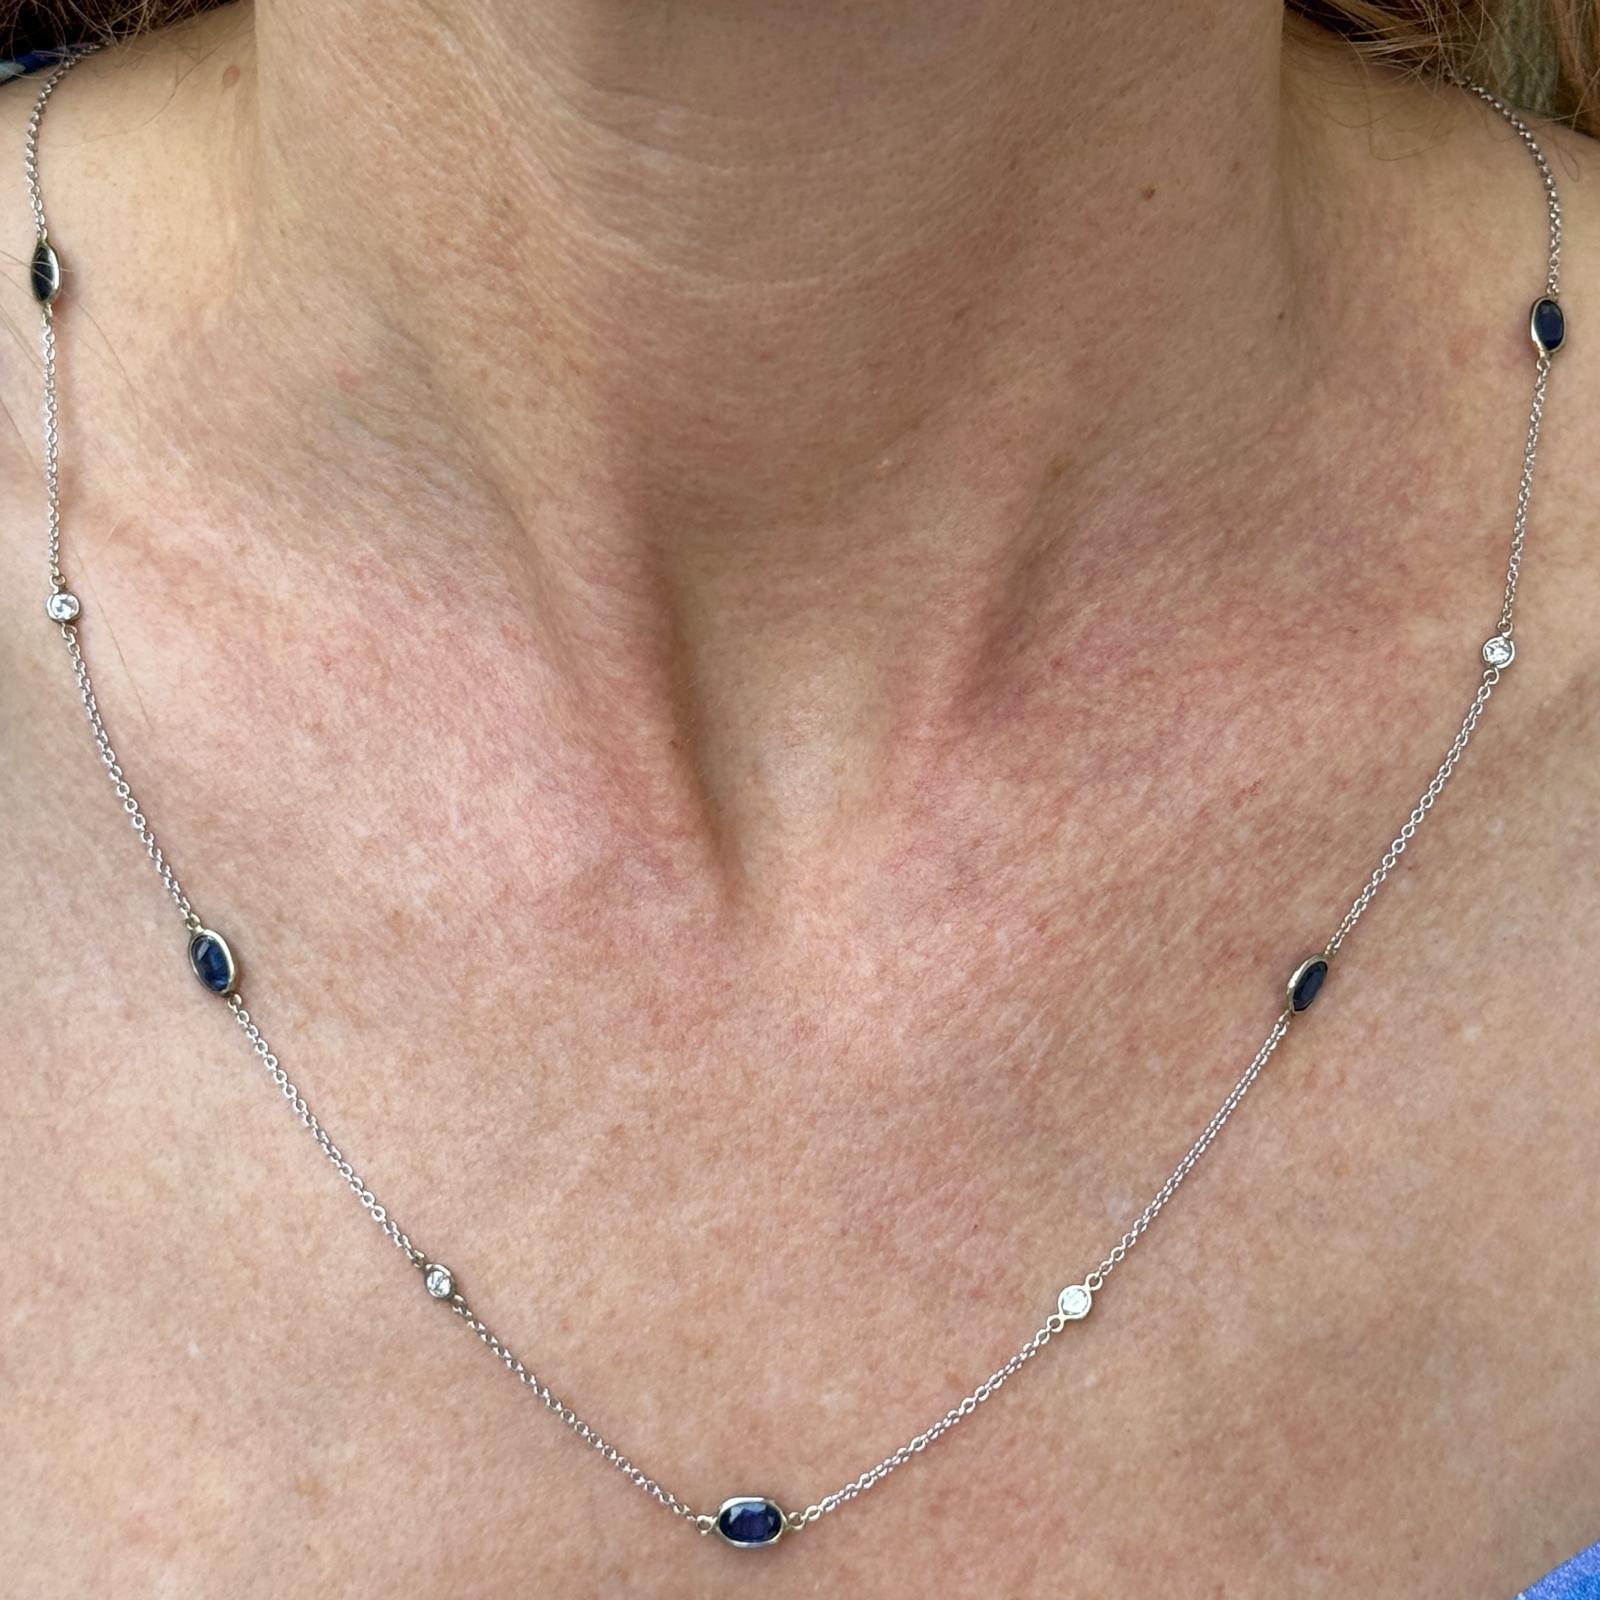 Modern sapphire and diamond By The Yard necklace crafted in 14 karat white gold. The necklace features 7 round brilliant cut diamonds weighing approximately .42 CTW and 8 oval blue sapphires weighing approximately 5.00 CTW. The diamonds are graded